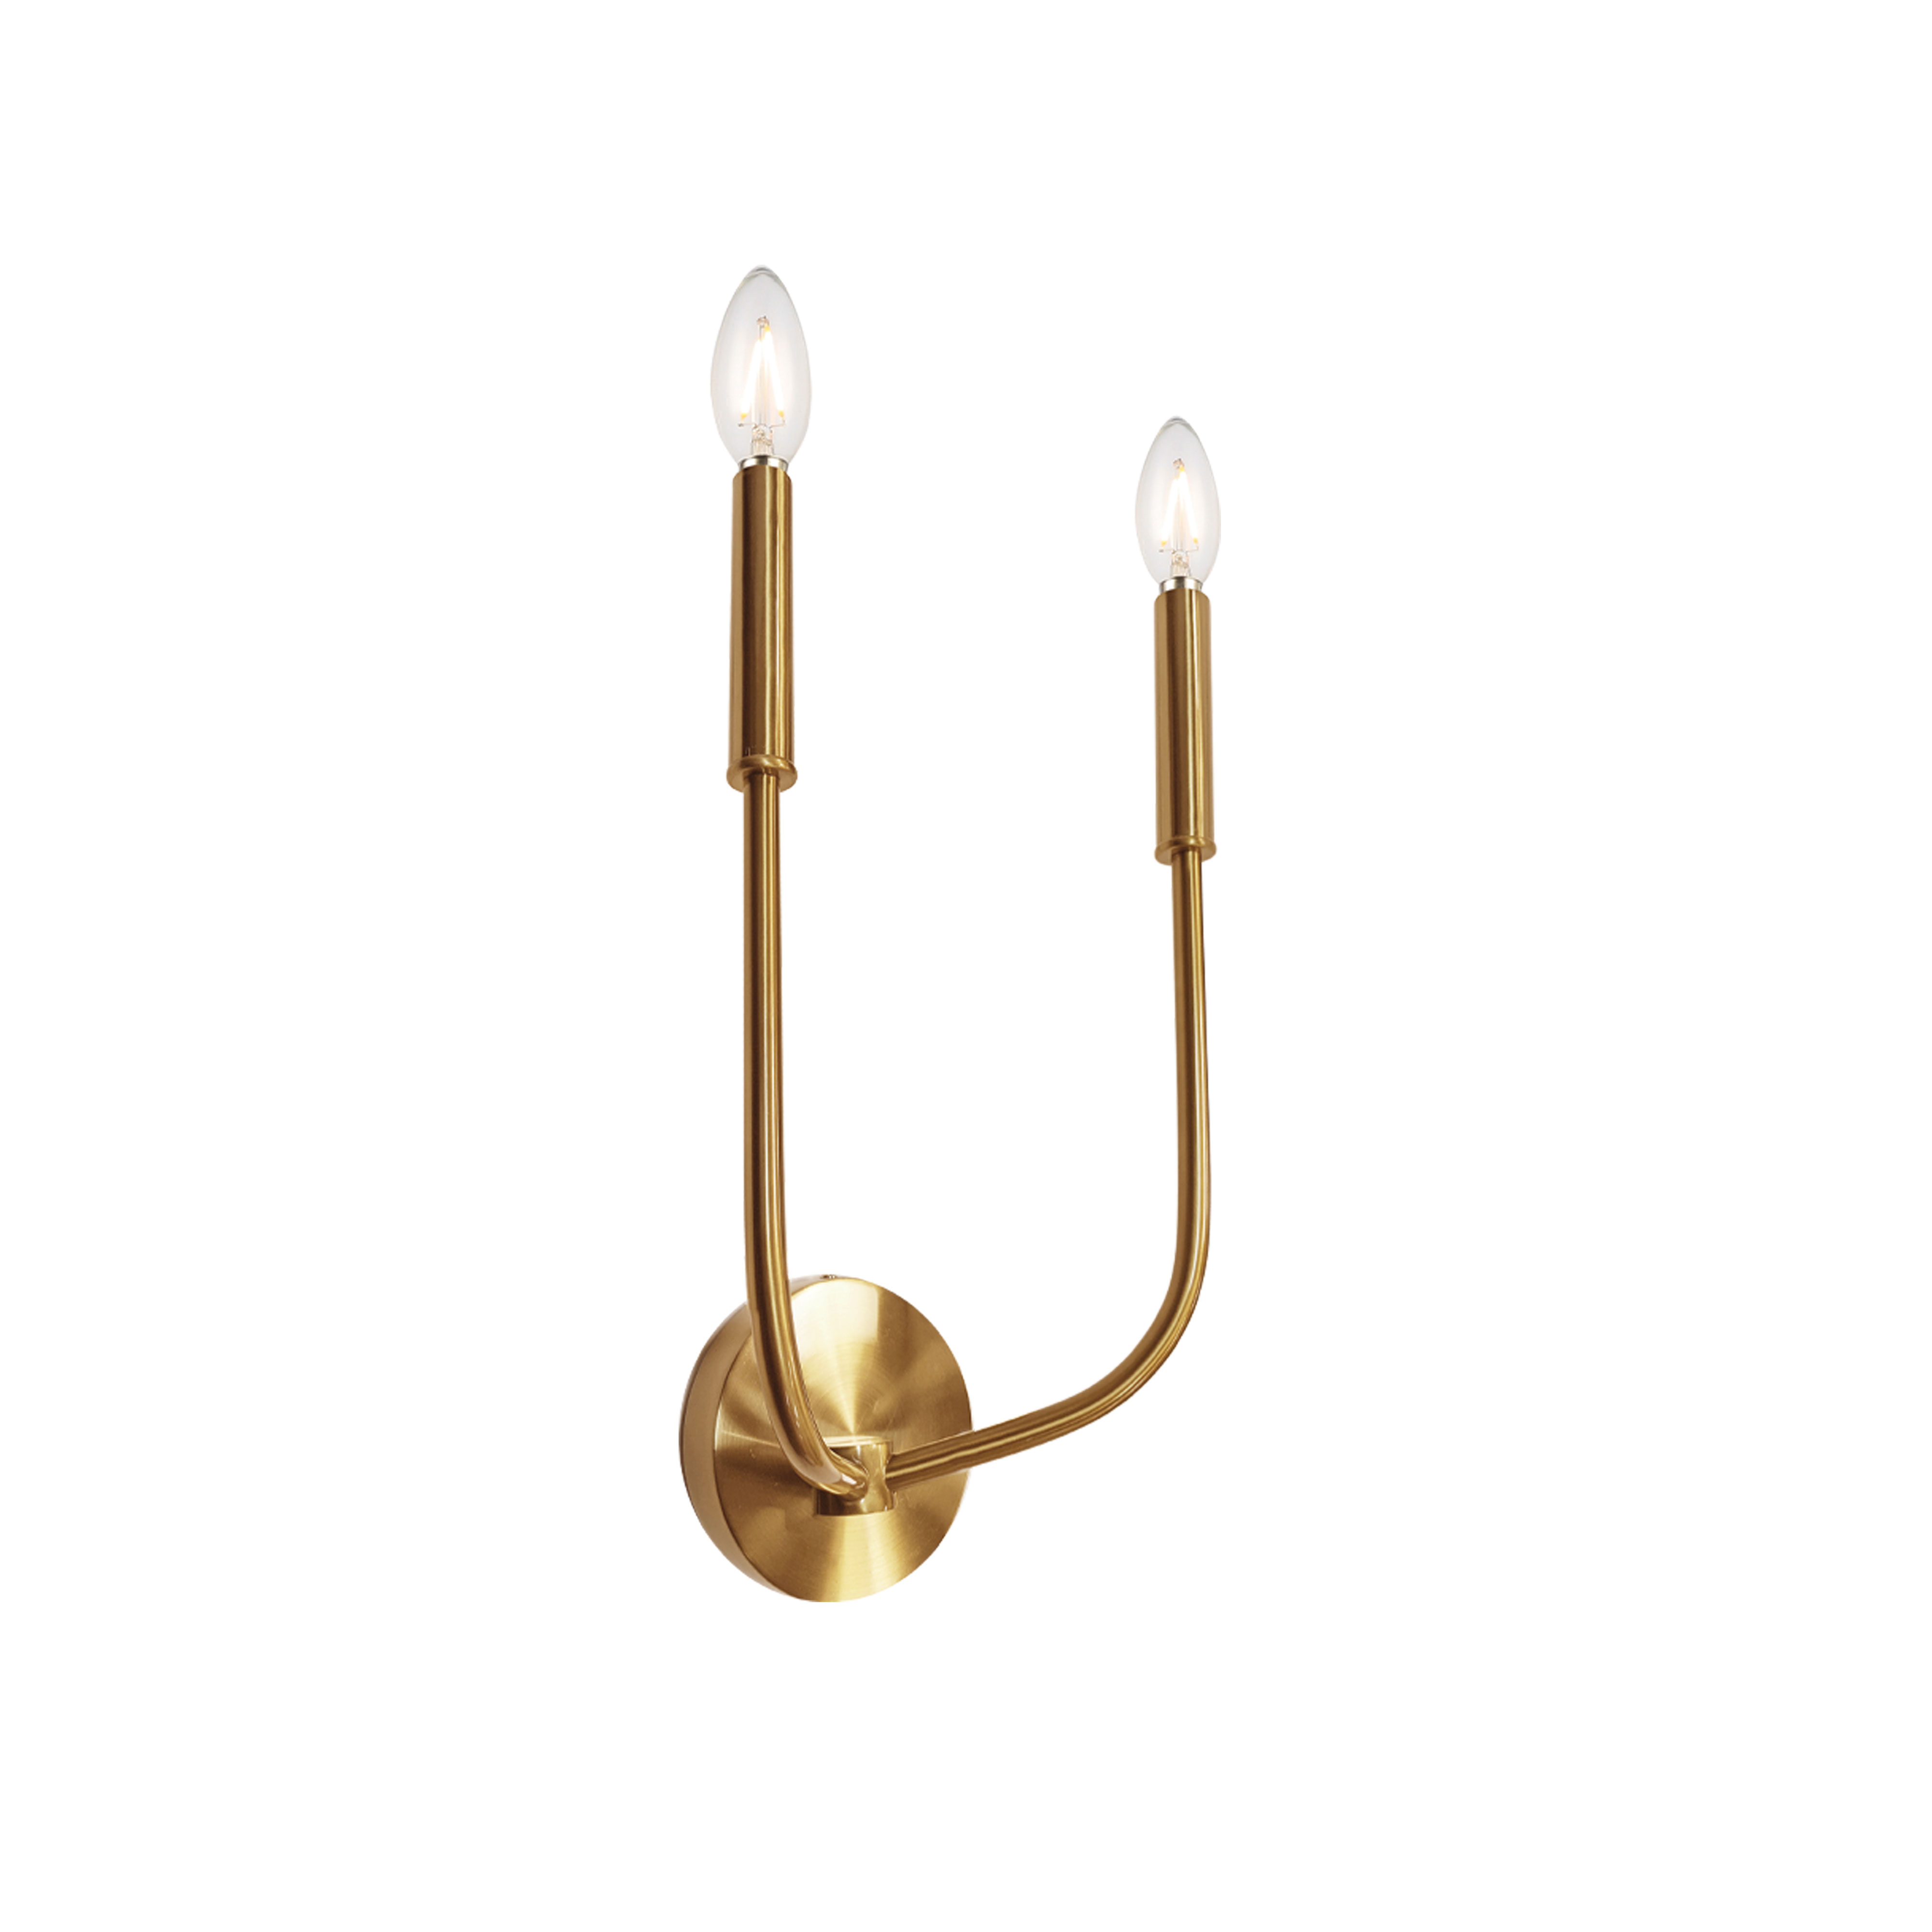 2 Light Incandescent Wall Sconce, Aged Brass